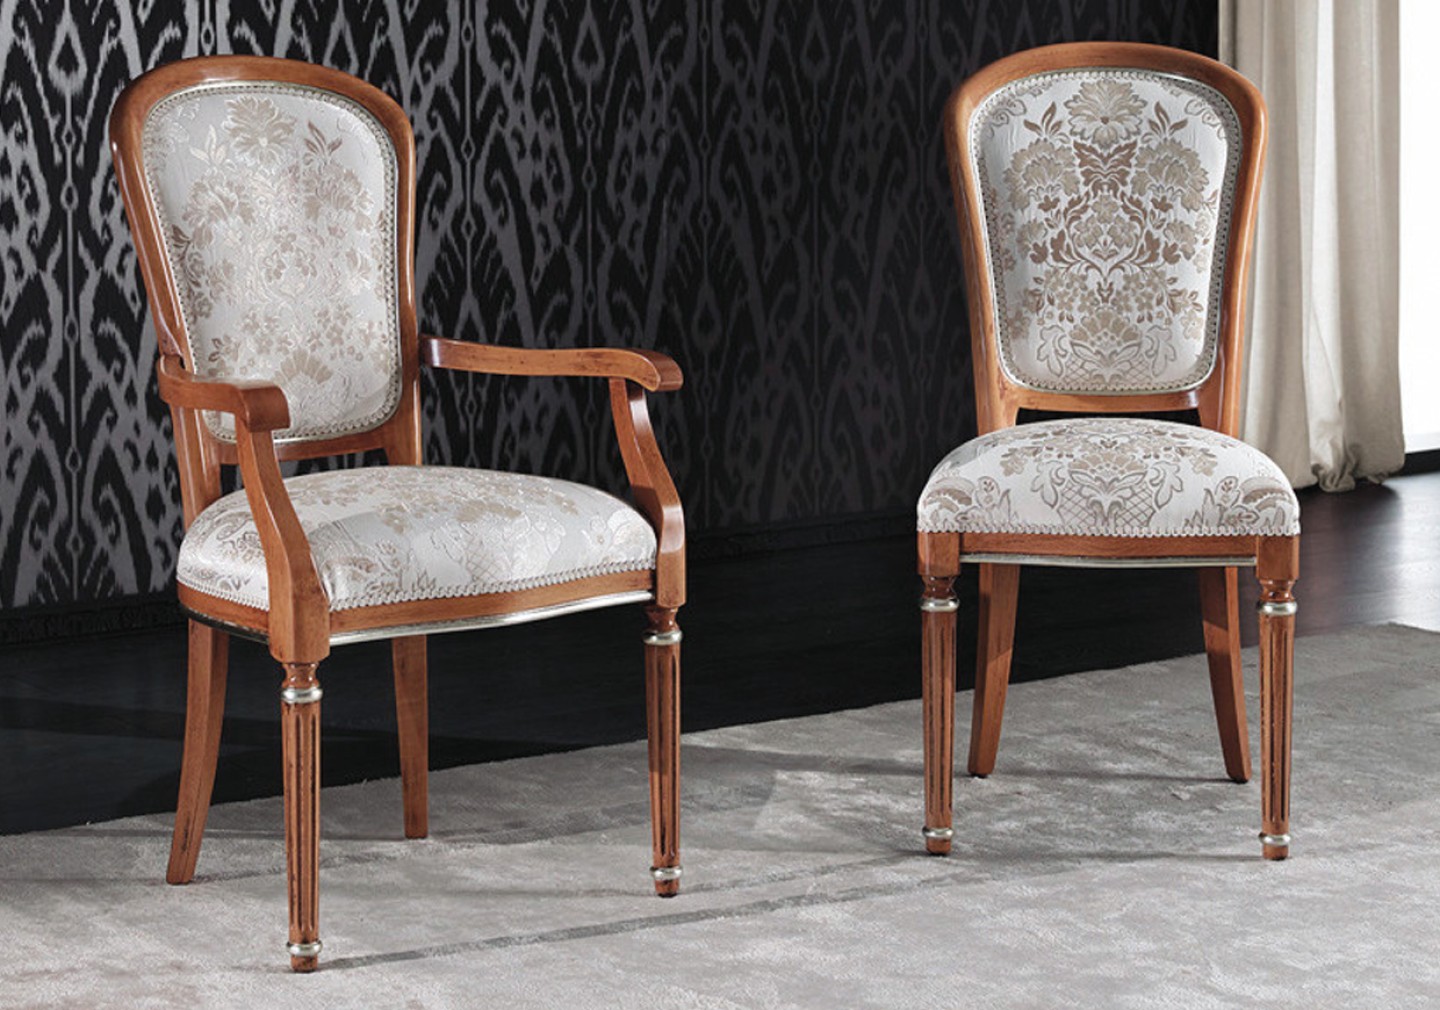 THE SAVONA CLASSIC DINING CHAIR